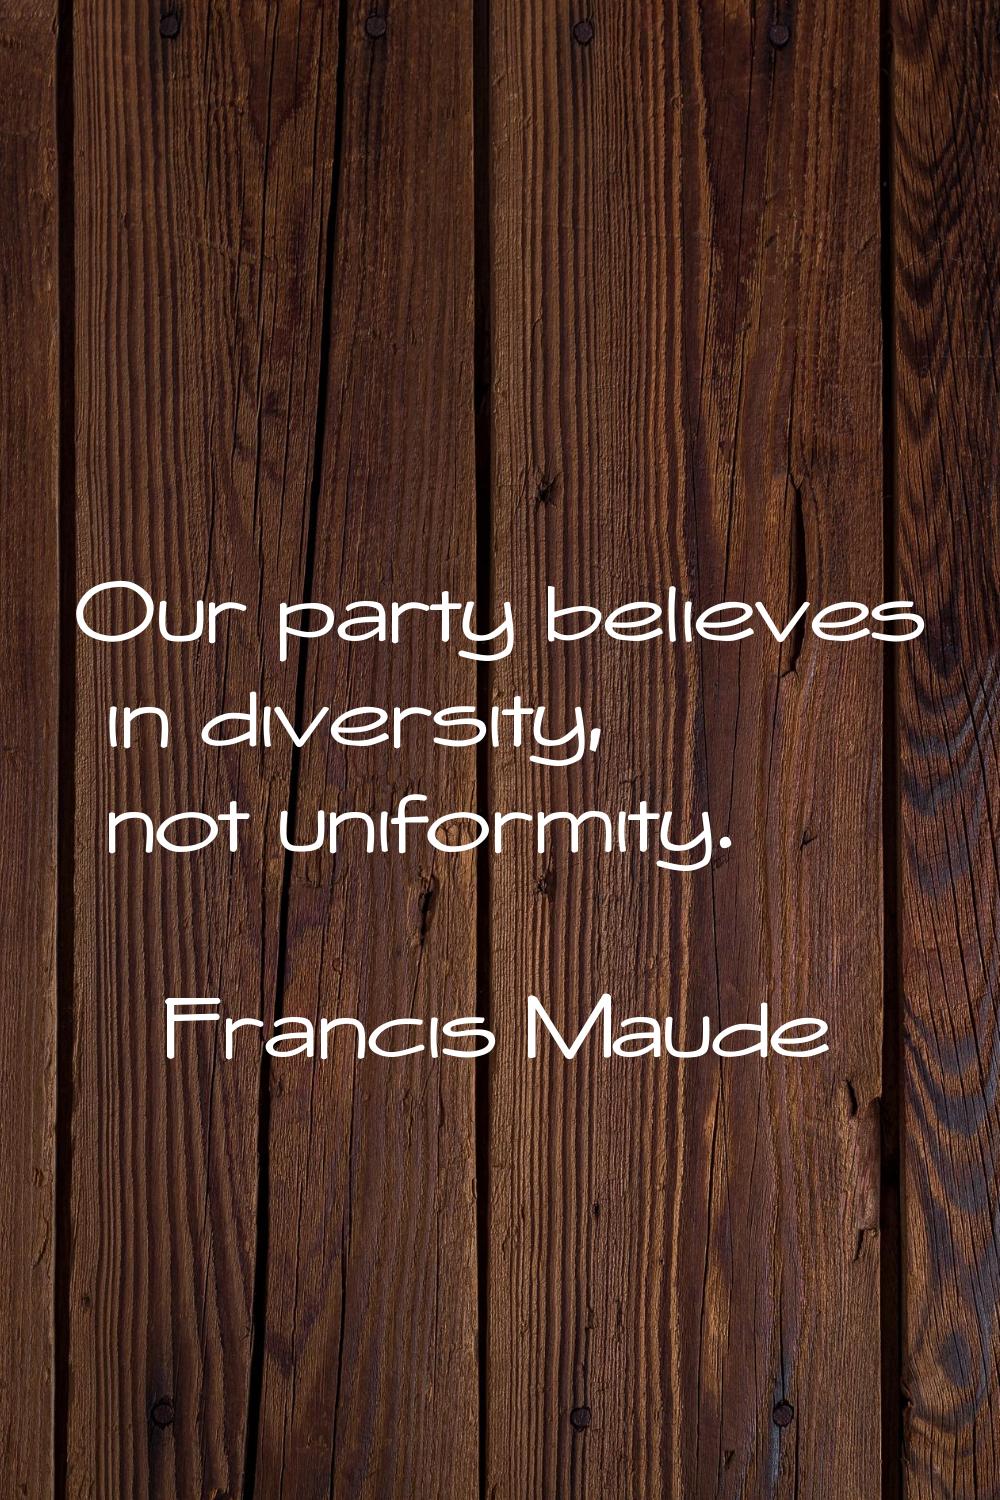 Our party believes in diversity, not uniformity.